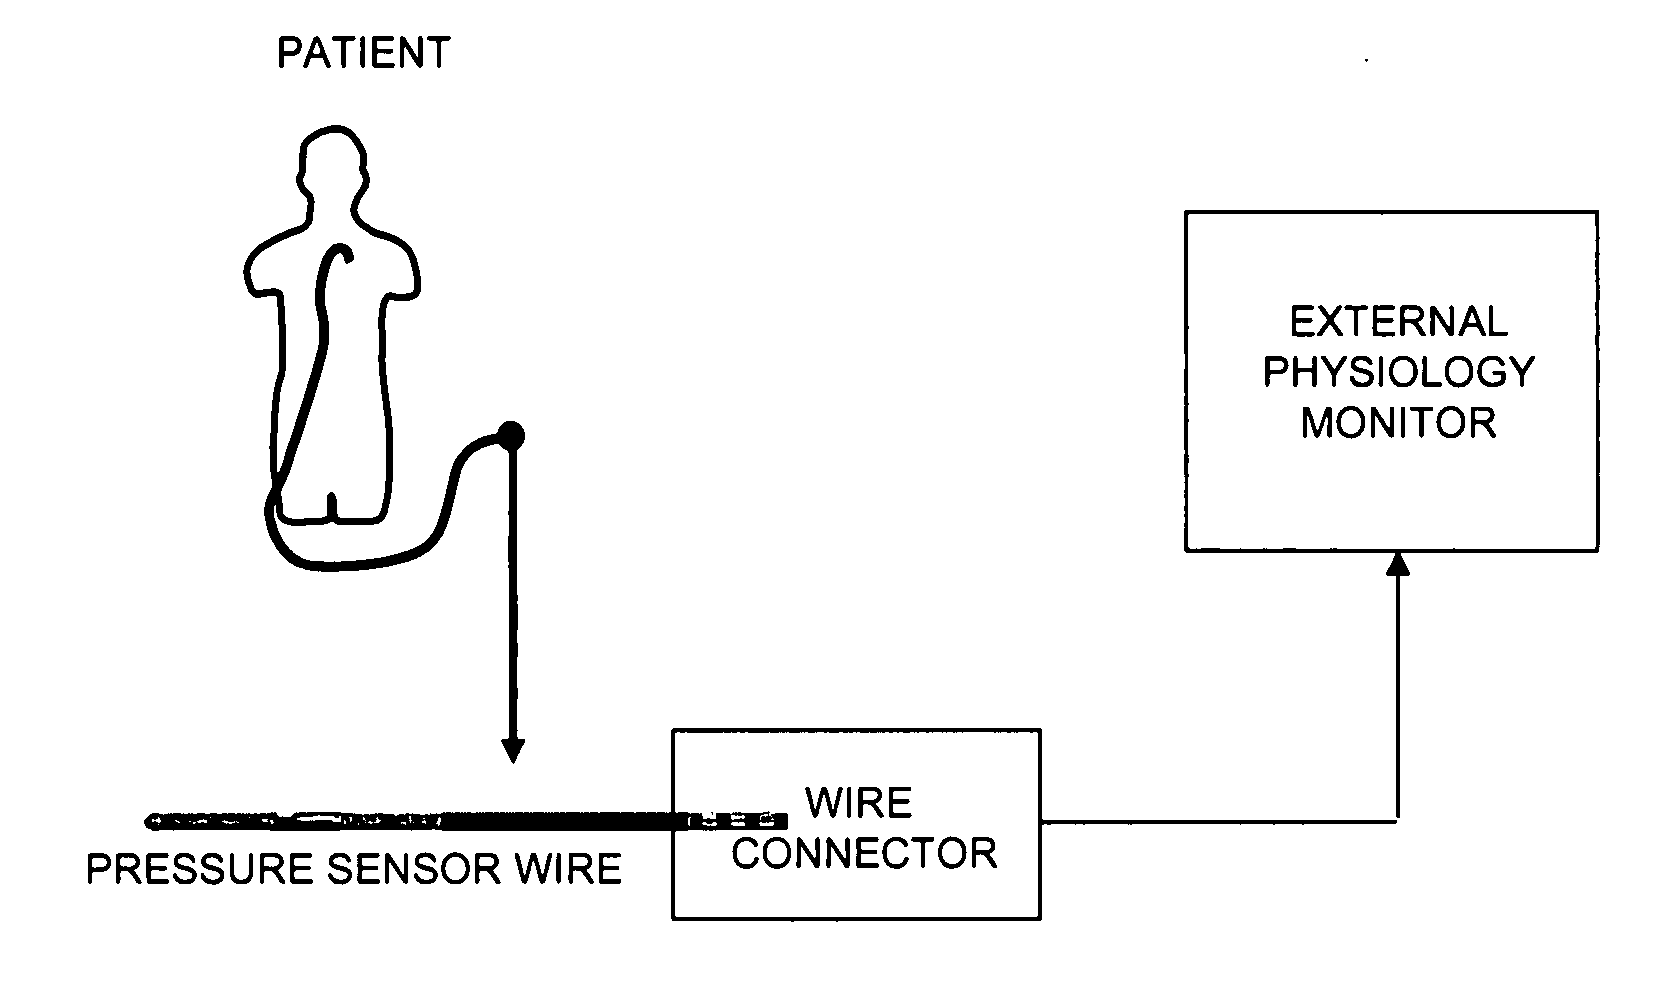 Pressure wire assembly